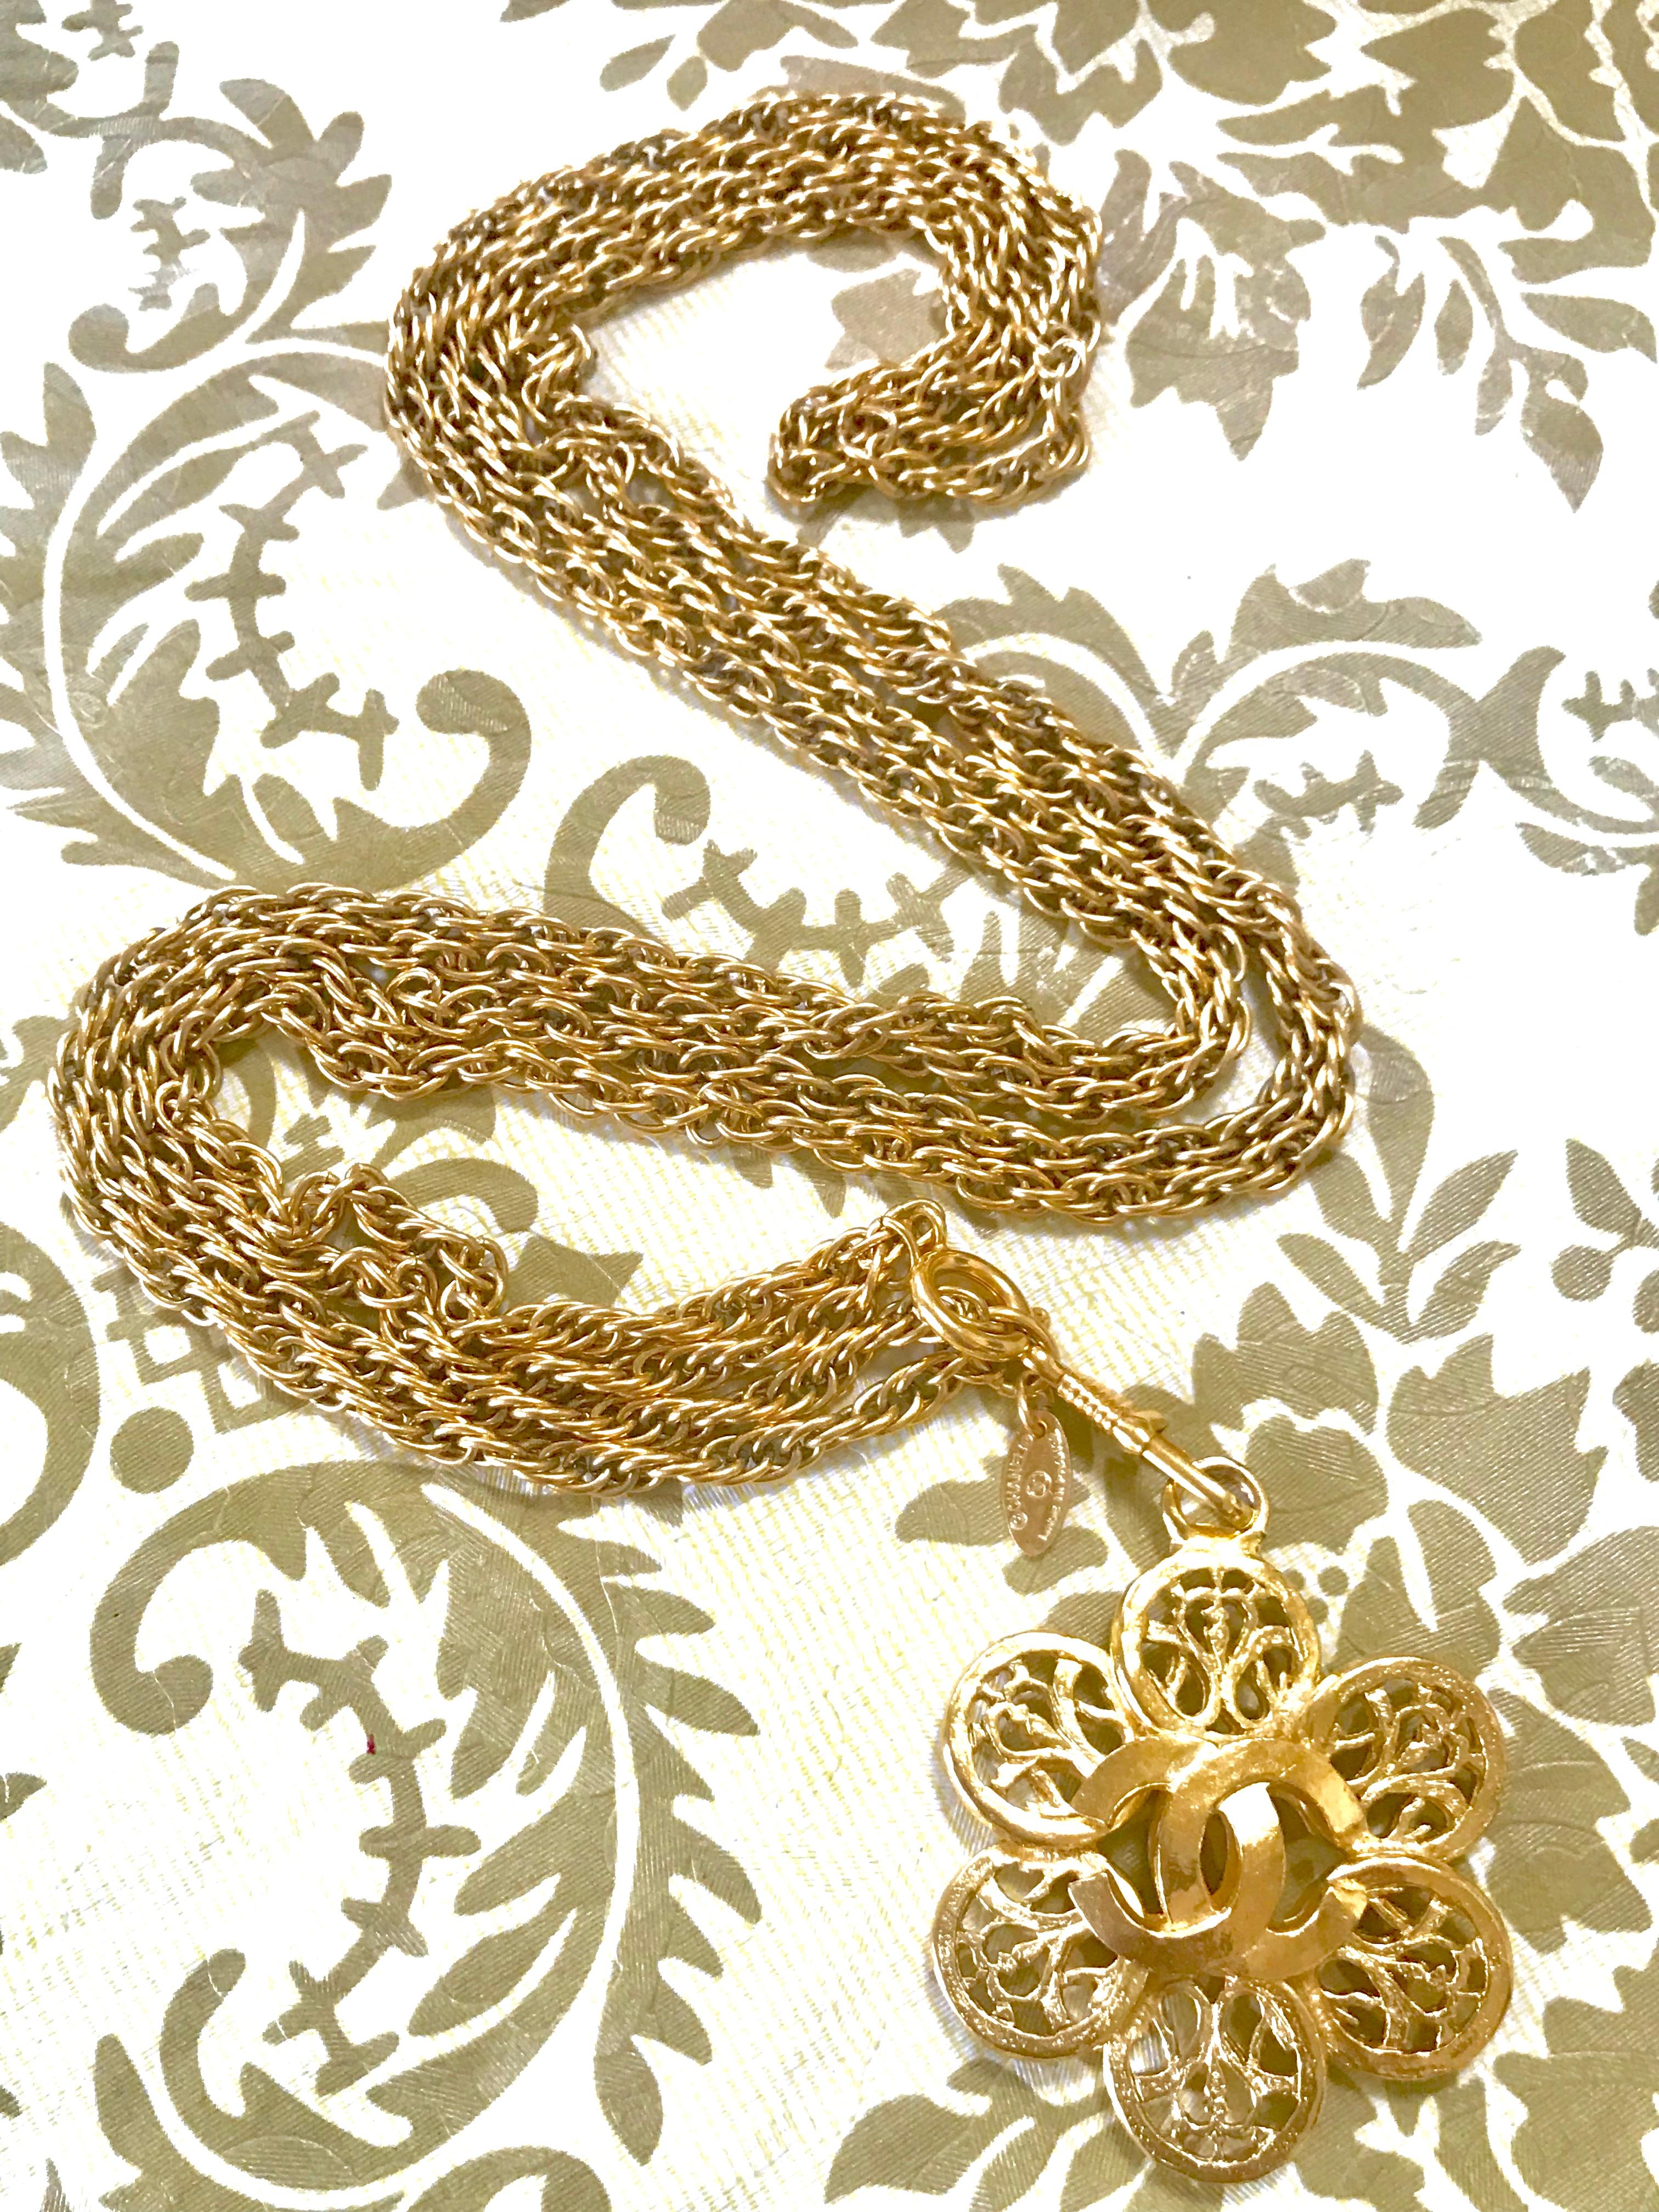 1990s. Vintage CHANEL double golden skinny chain long necklace with arabesque petal flower motif CC pendant top. Classic jewelry.

Introducing a classic and beautiful necklace from CHANEL back in the 90's, golden skinny double chain necklace with